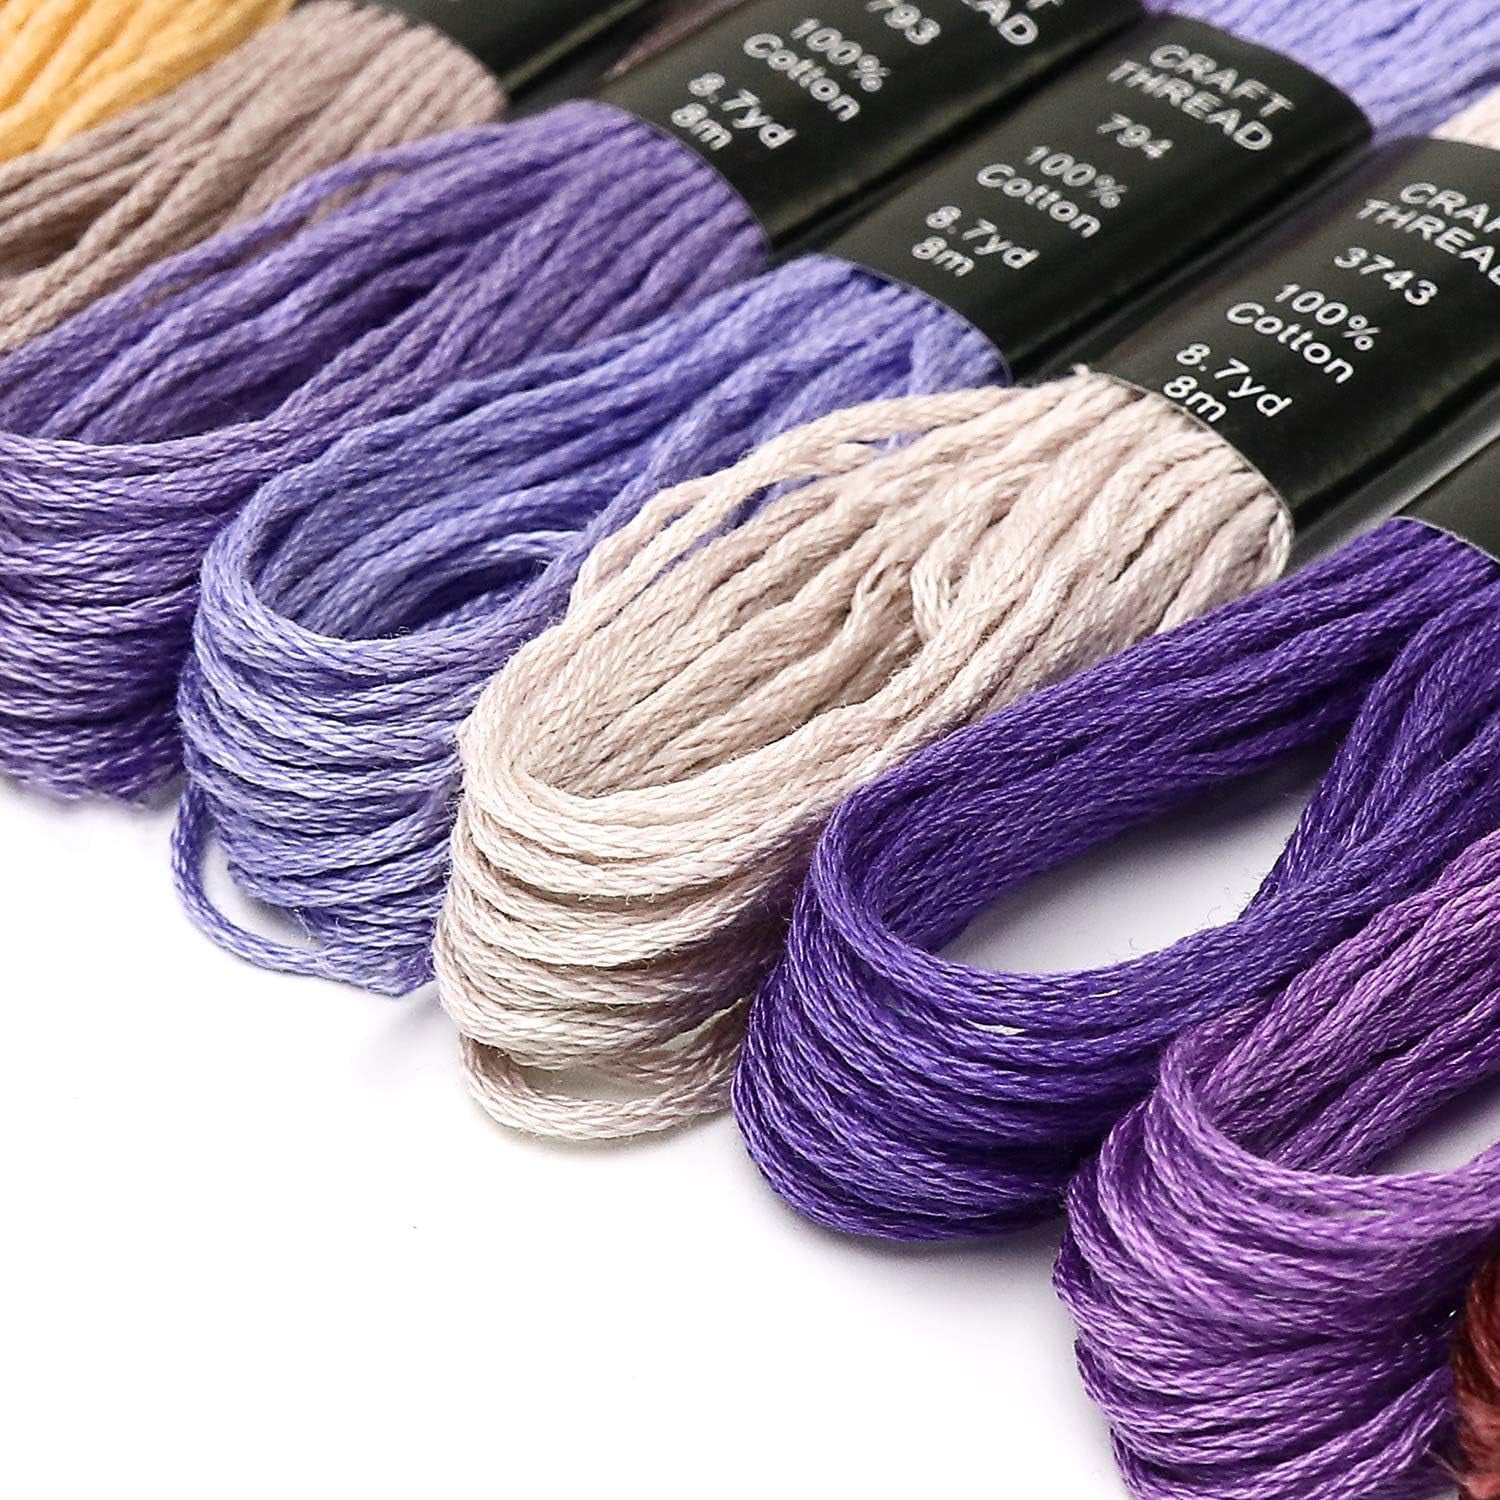 Embroidery Floss Rainbow Color 100 Skeins per Pack Cross Stitch Threads Friendship Bracelets Floss Crafts Floss